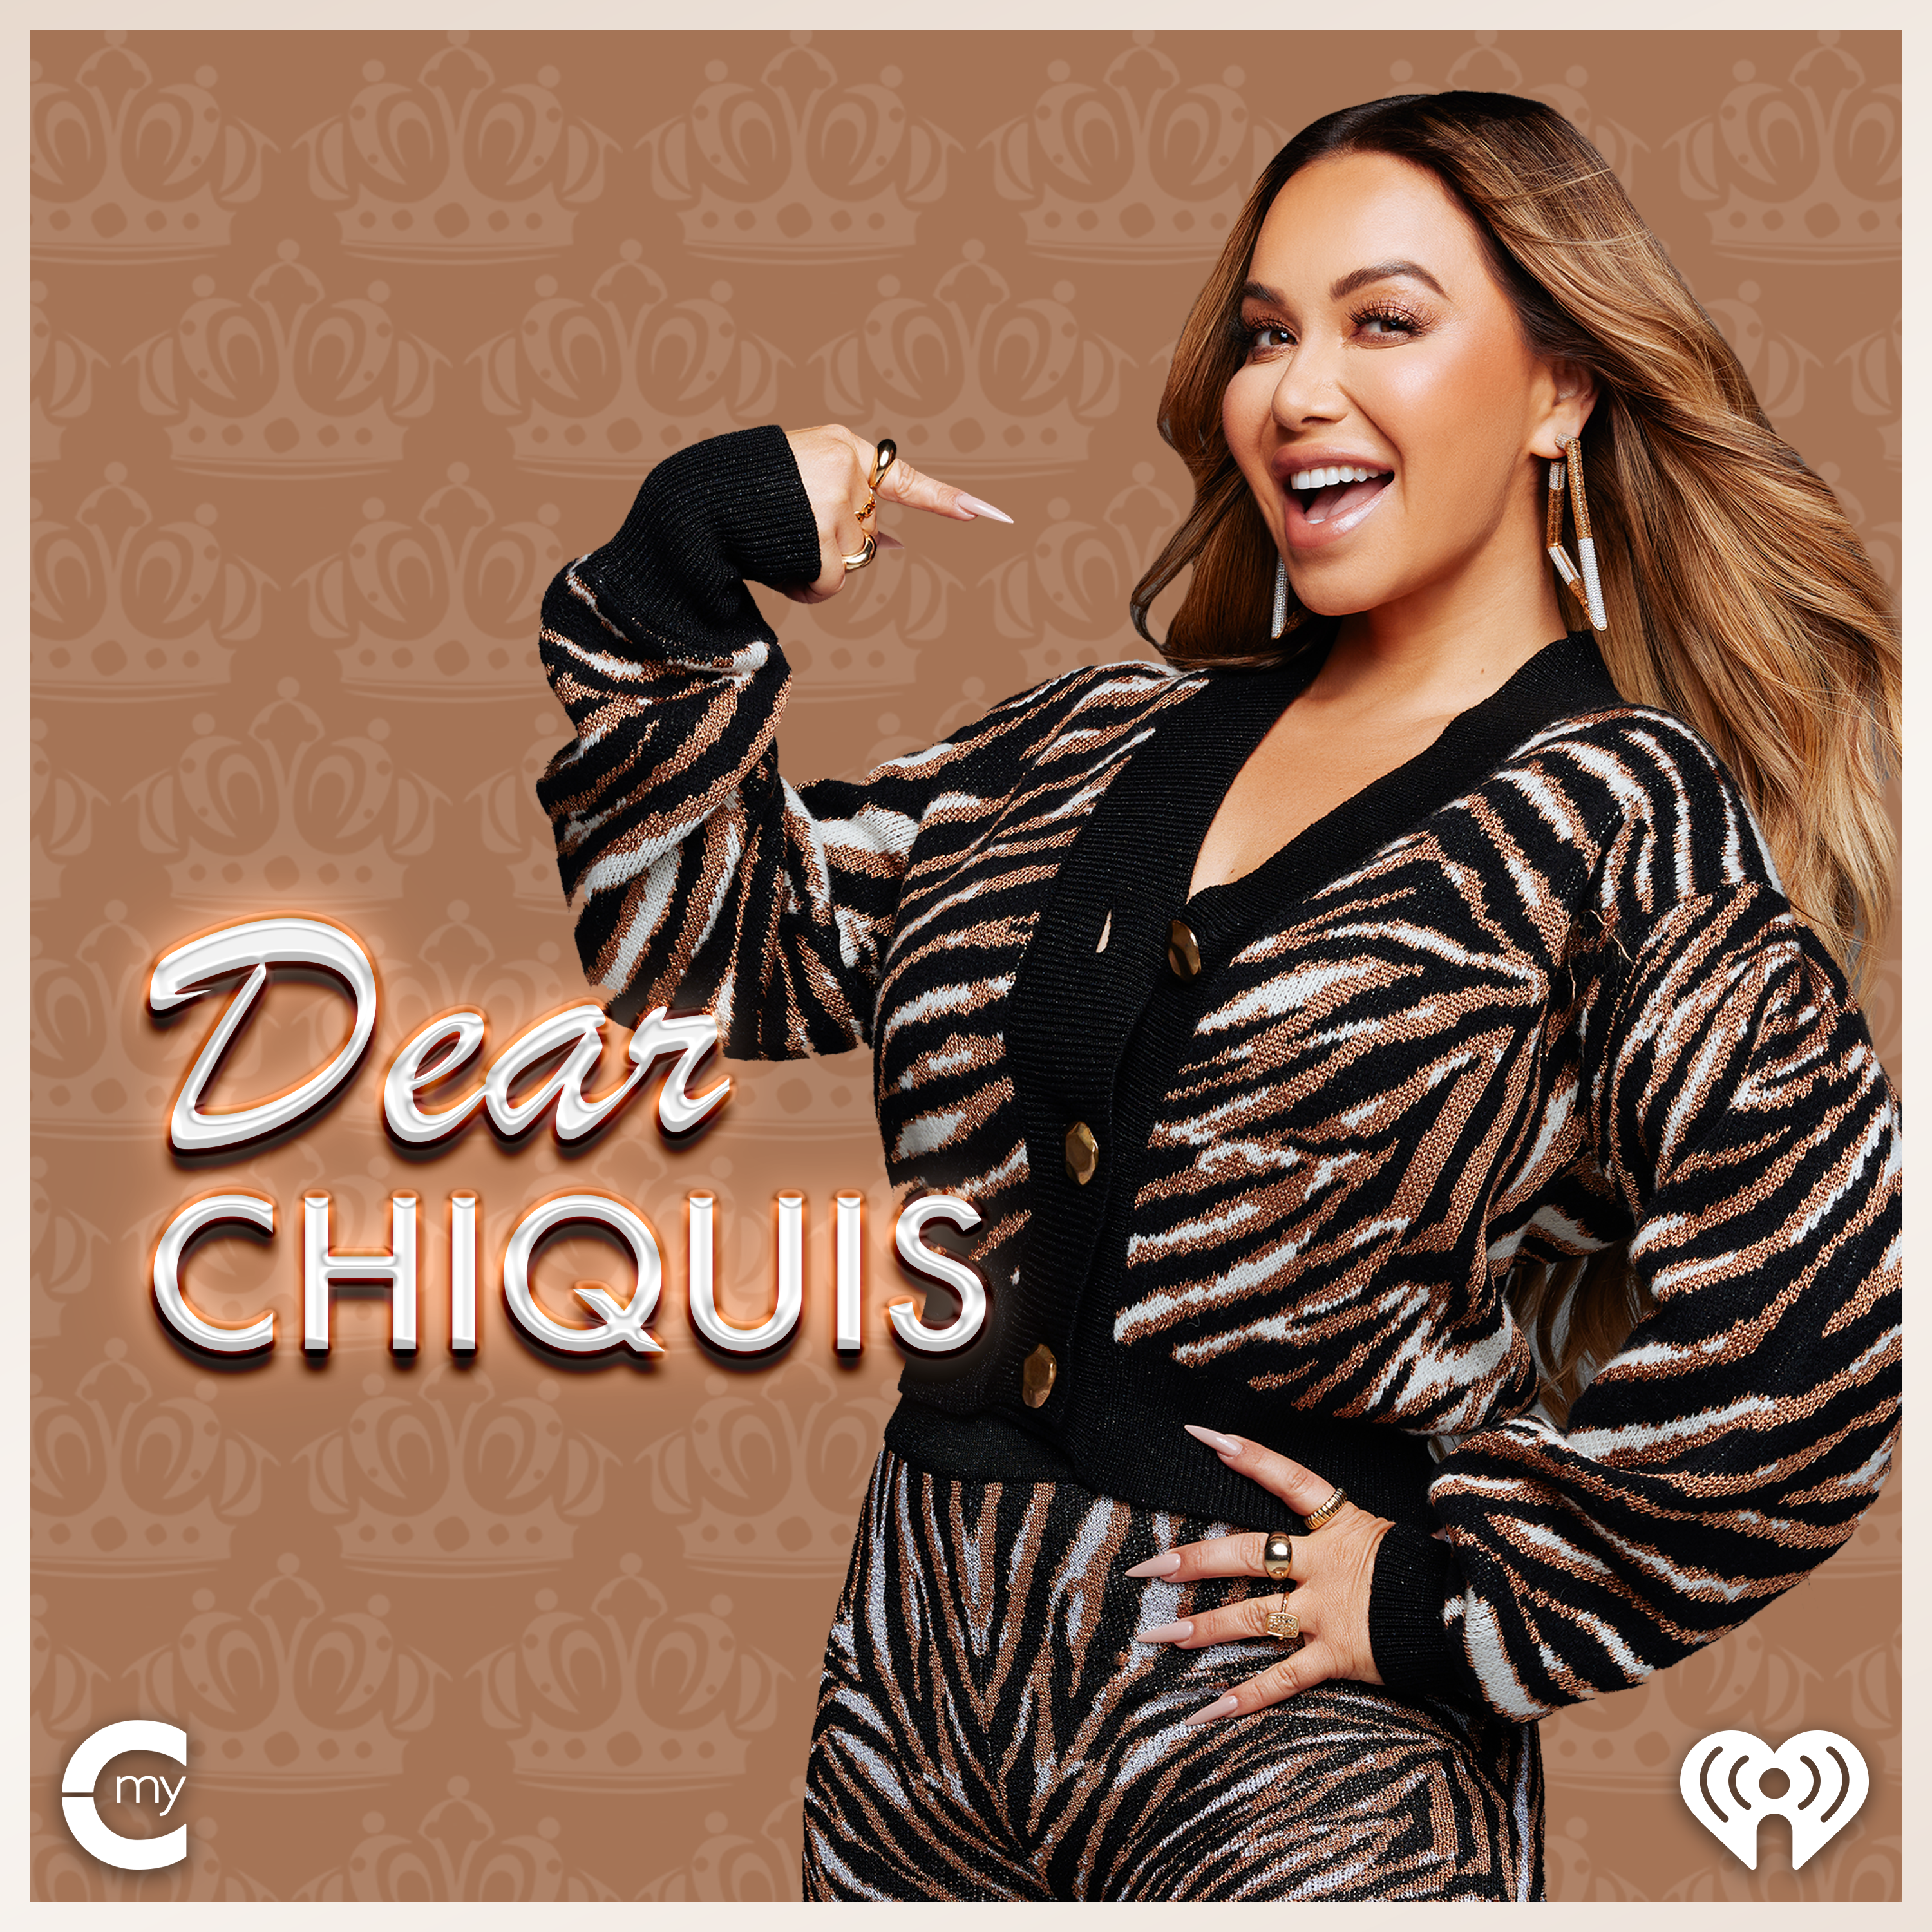 Dear Chiquis: Improving Public Speaking Skills, Issues with My In-Laws and How to Support Children with Autism